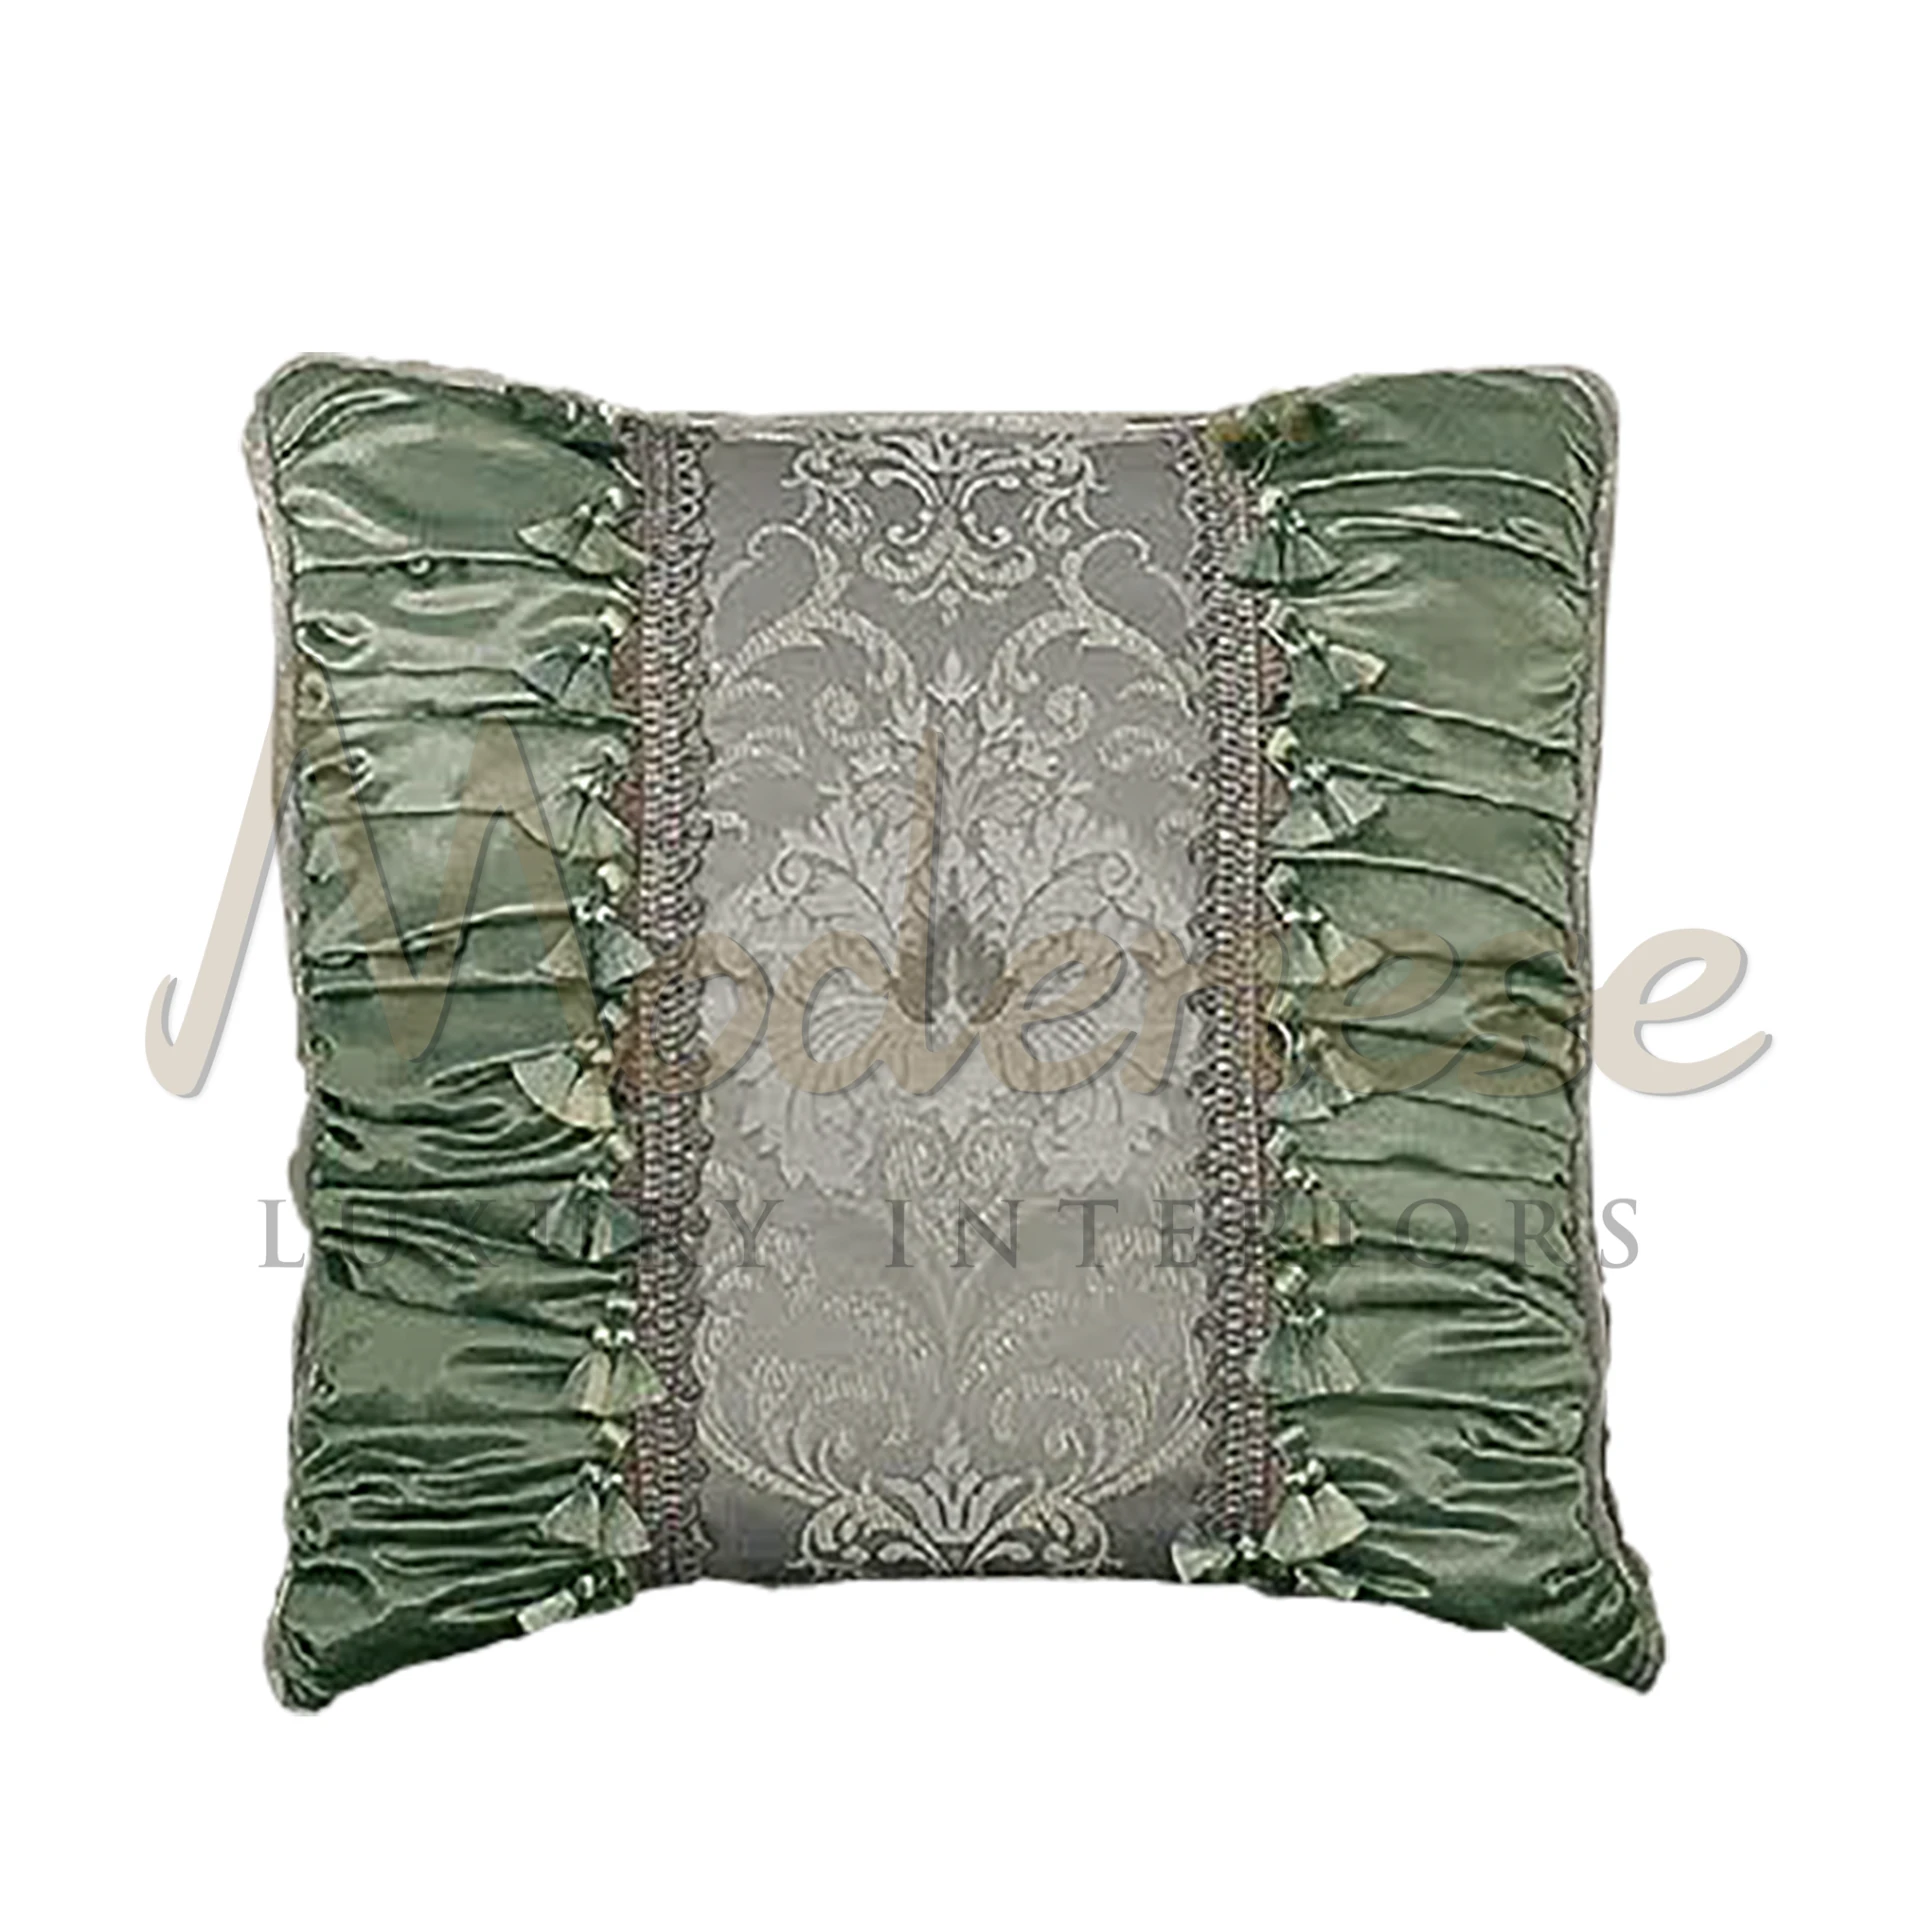 Victorian Noble Pillow on a regal sofa, exuding an air of sophistication and refined beauty in a luxurious home setting.